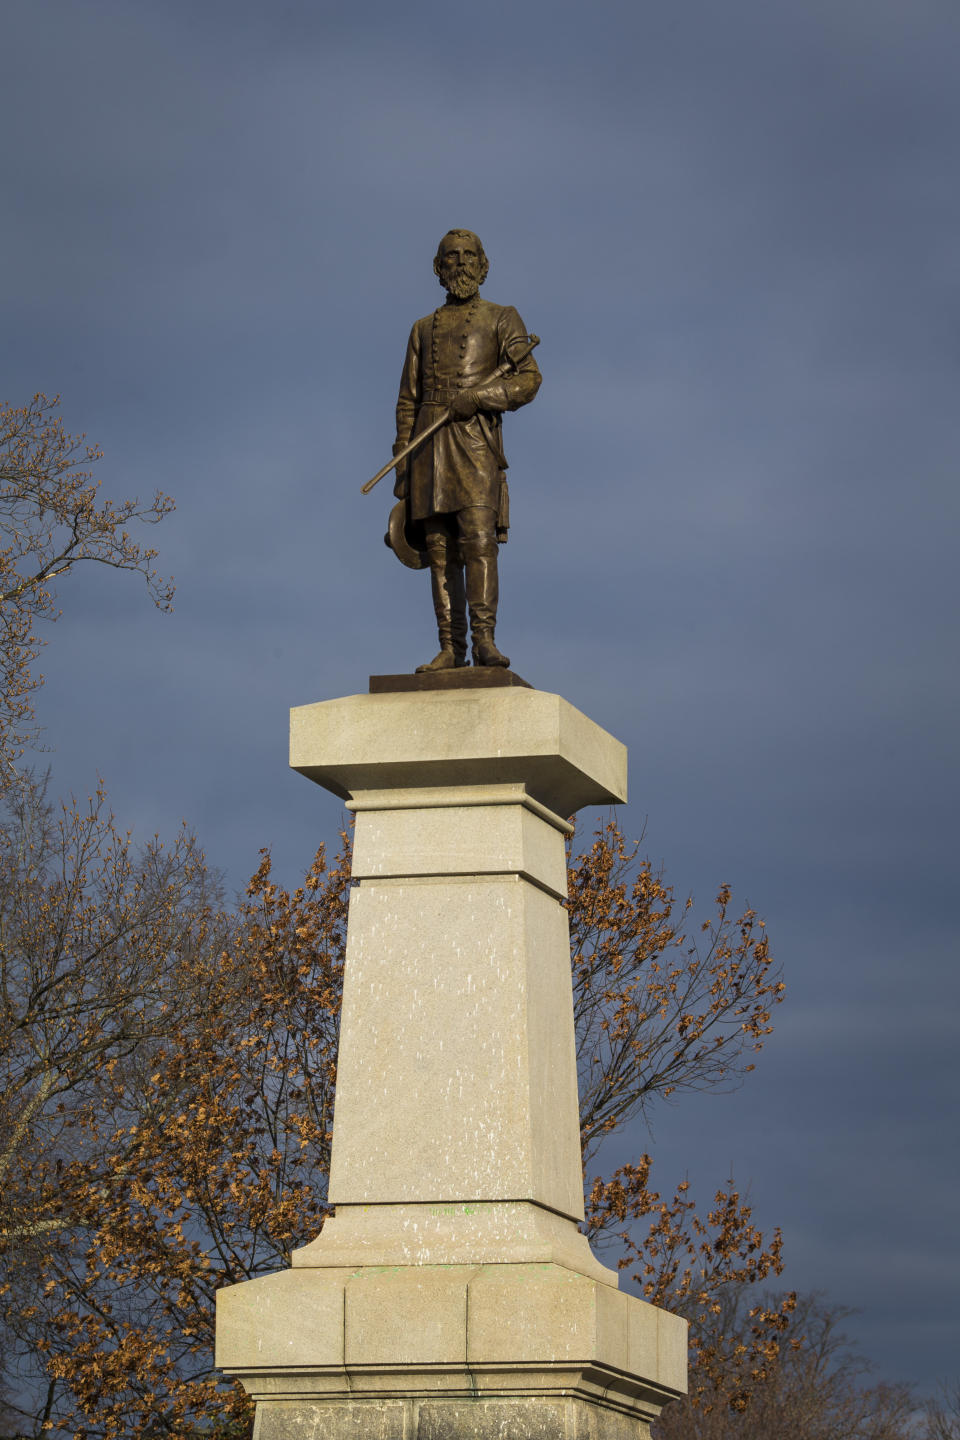 The statue of Lieutenant General A.P. Hill stands before being taken off its pedestal on Monday, Dec. 12, 2022 in Richmond, Va. The statue was erected in 1891. (AP Photo/John C. Clark)